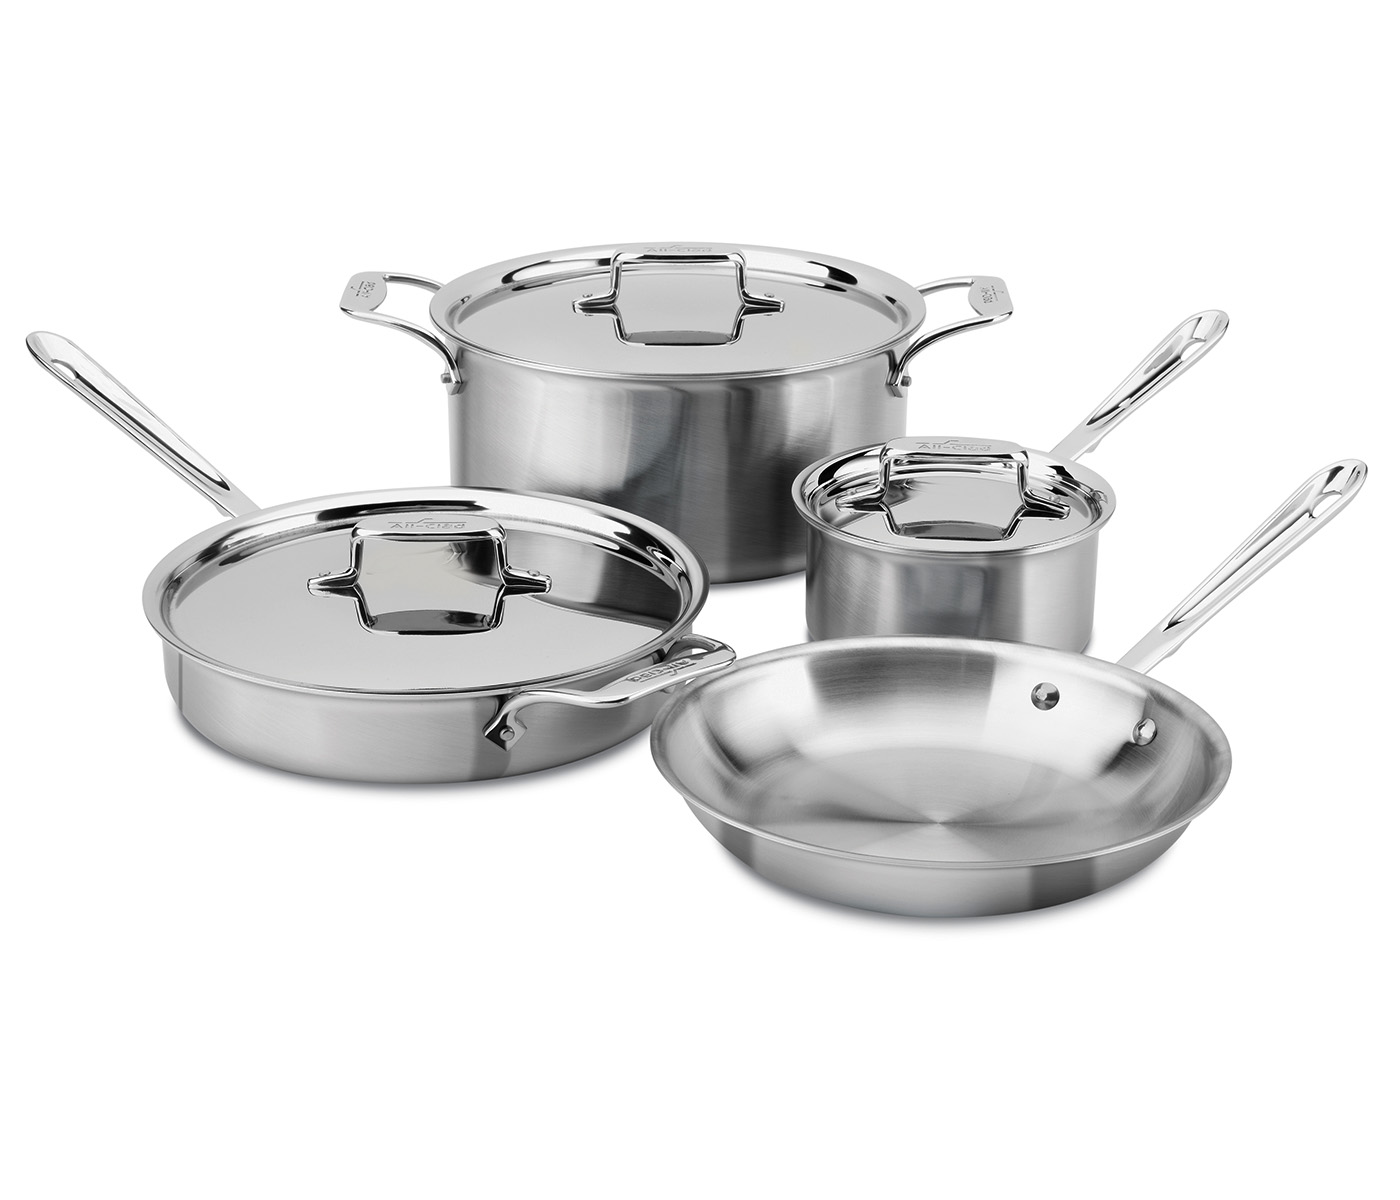 All-Clad d5 Brushed Stainless 7 Piece Cookware Set | eBay